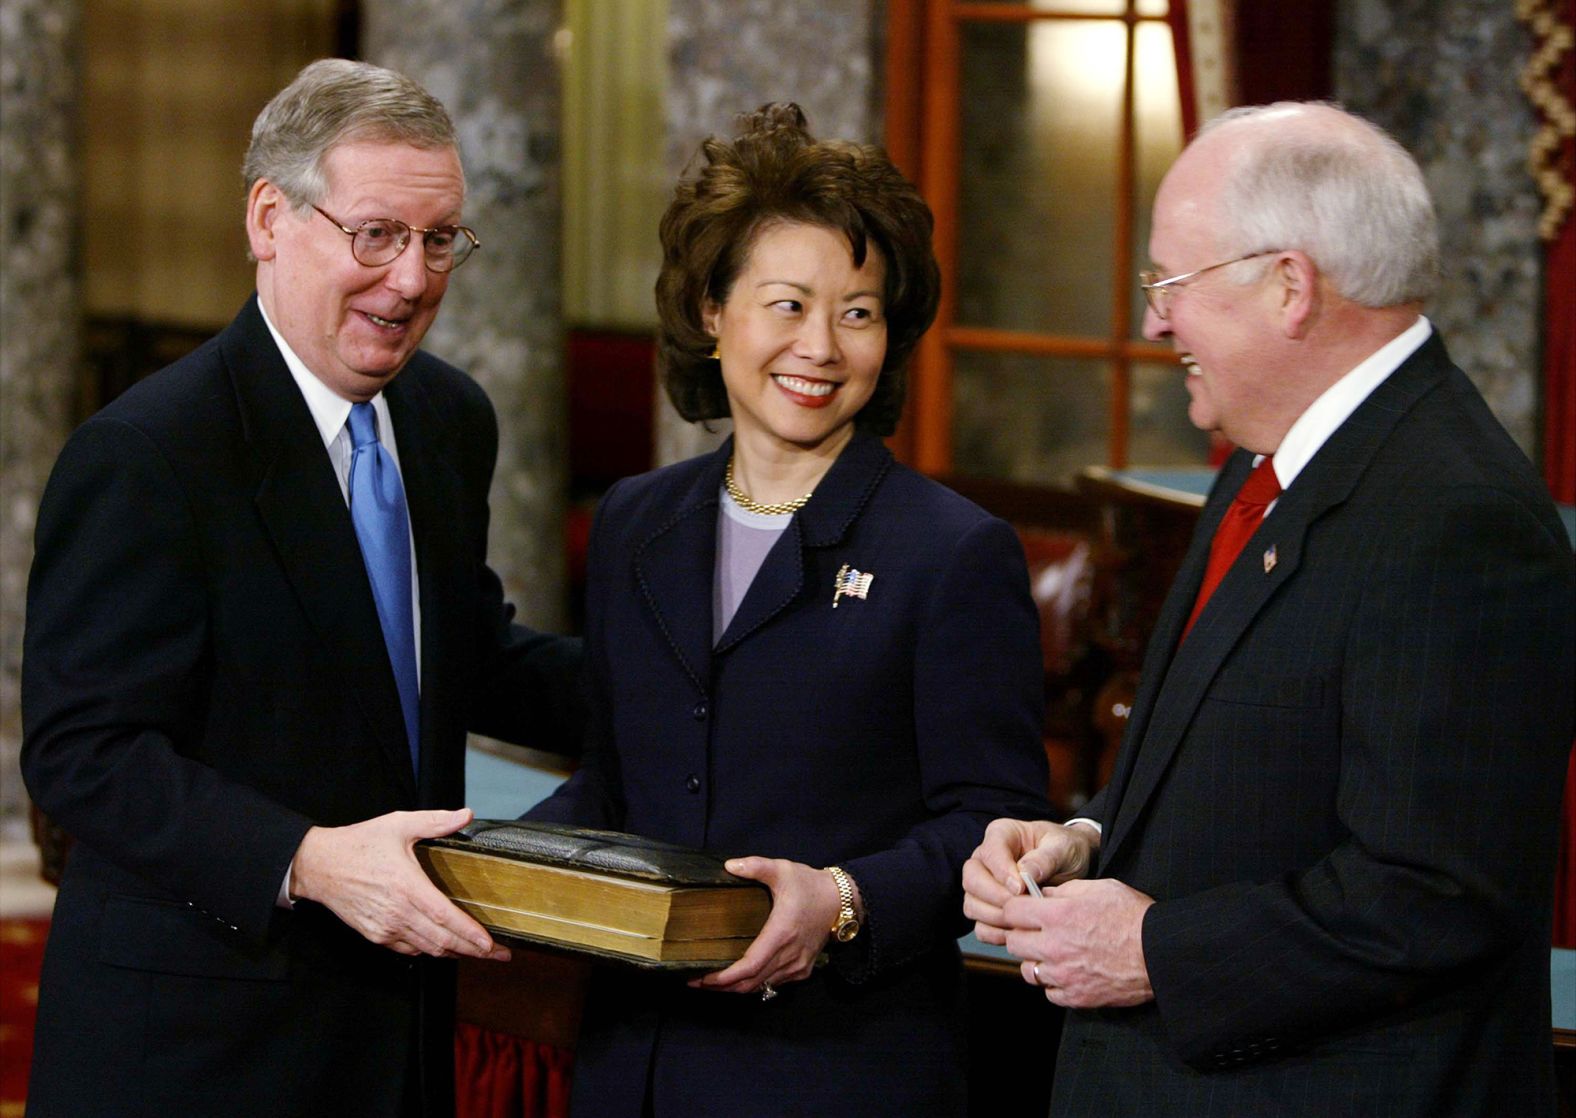 Vice President Dick Cheney jokes with McConnell and his wife, Elaine Chao, at his swearing-in reenactment in January 2003.